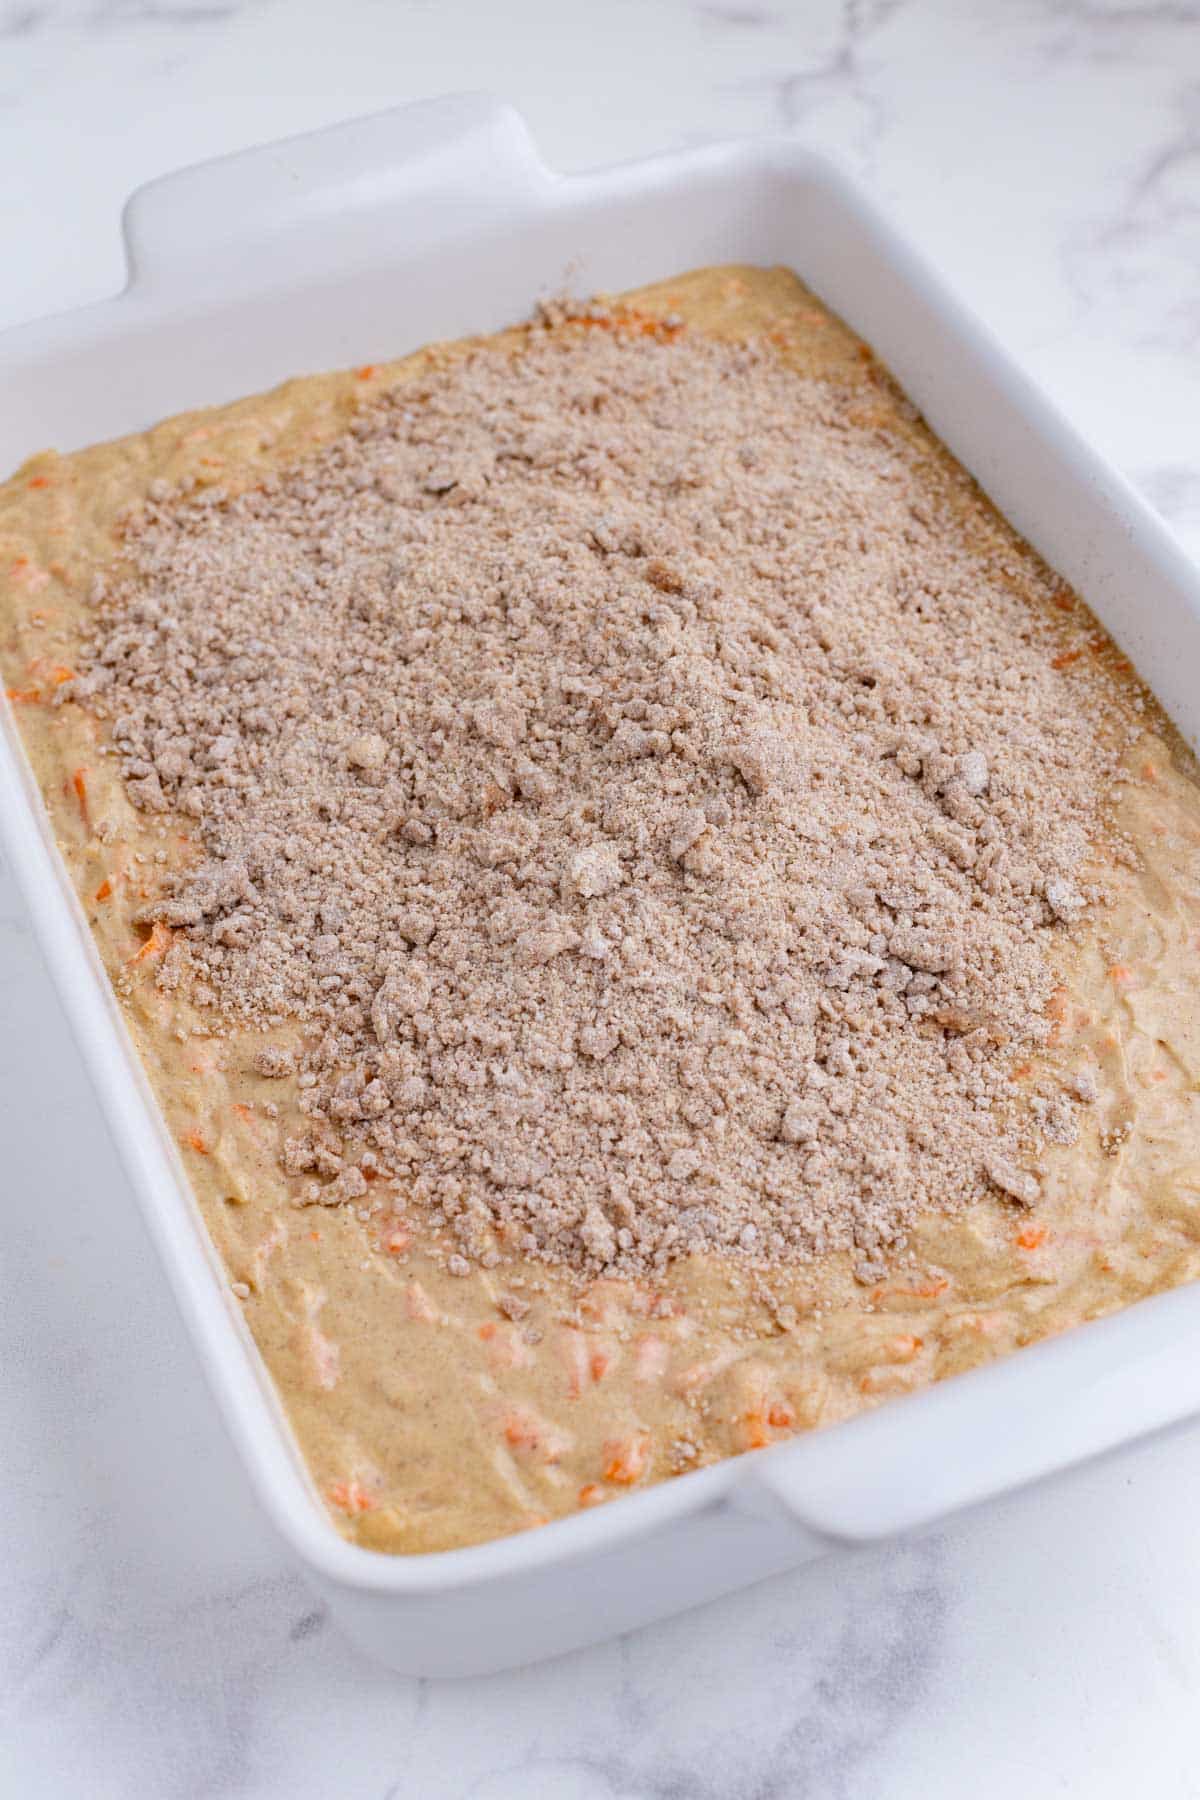 The crumb topping is spread across the batter.